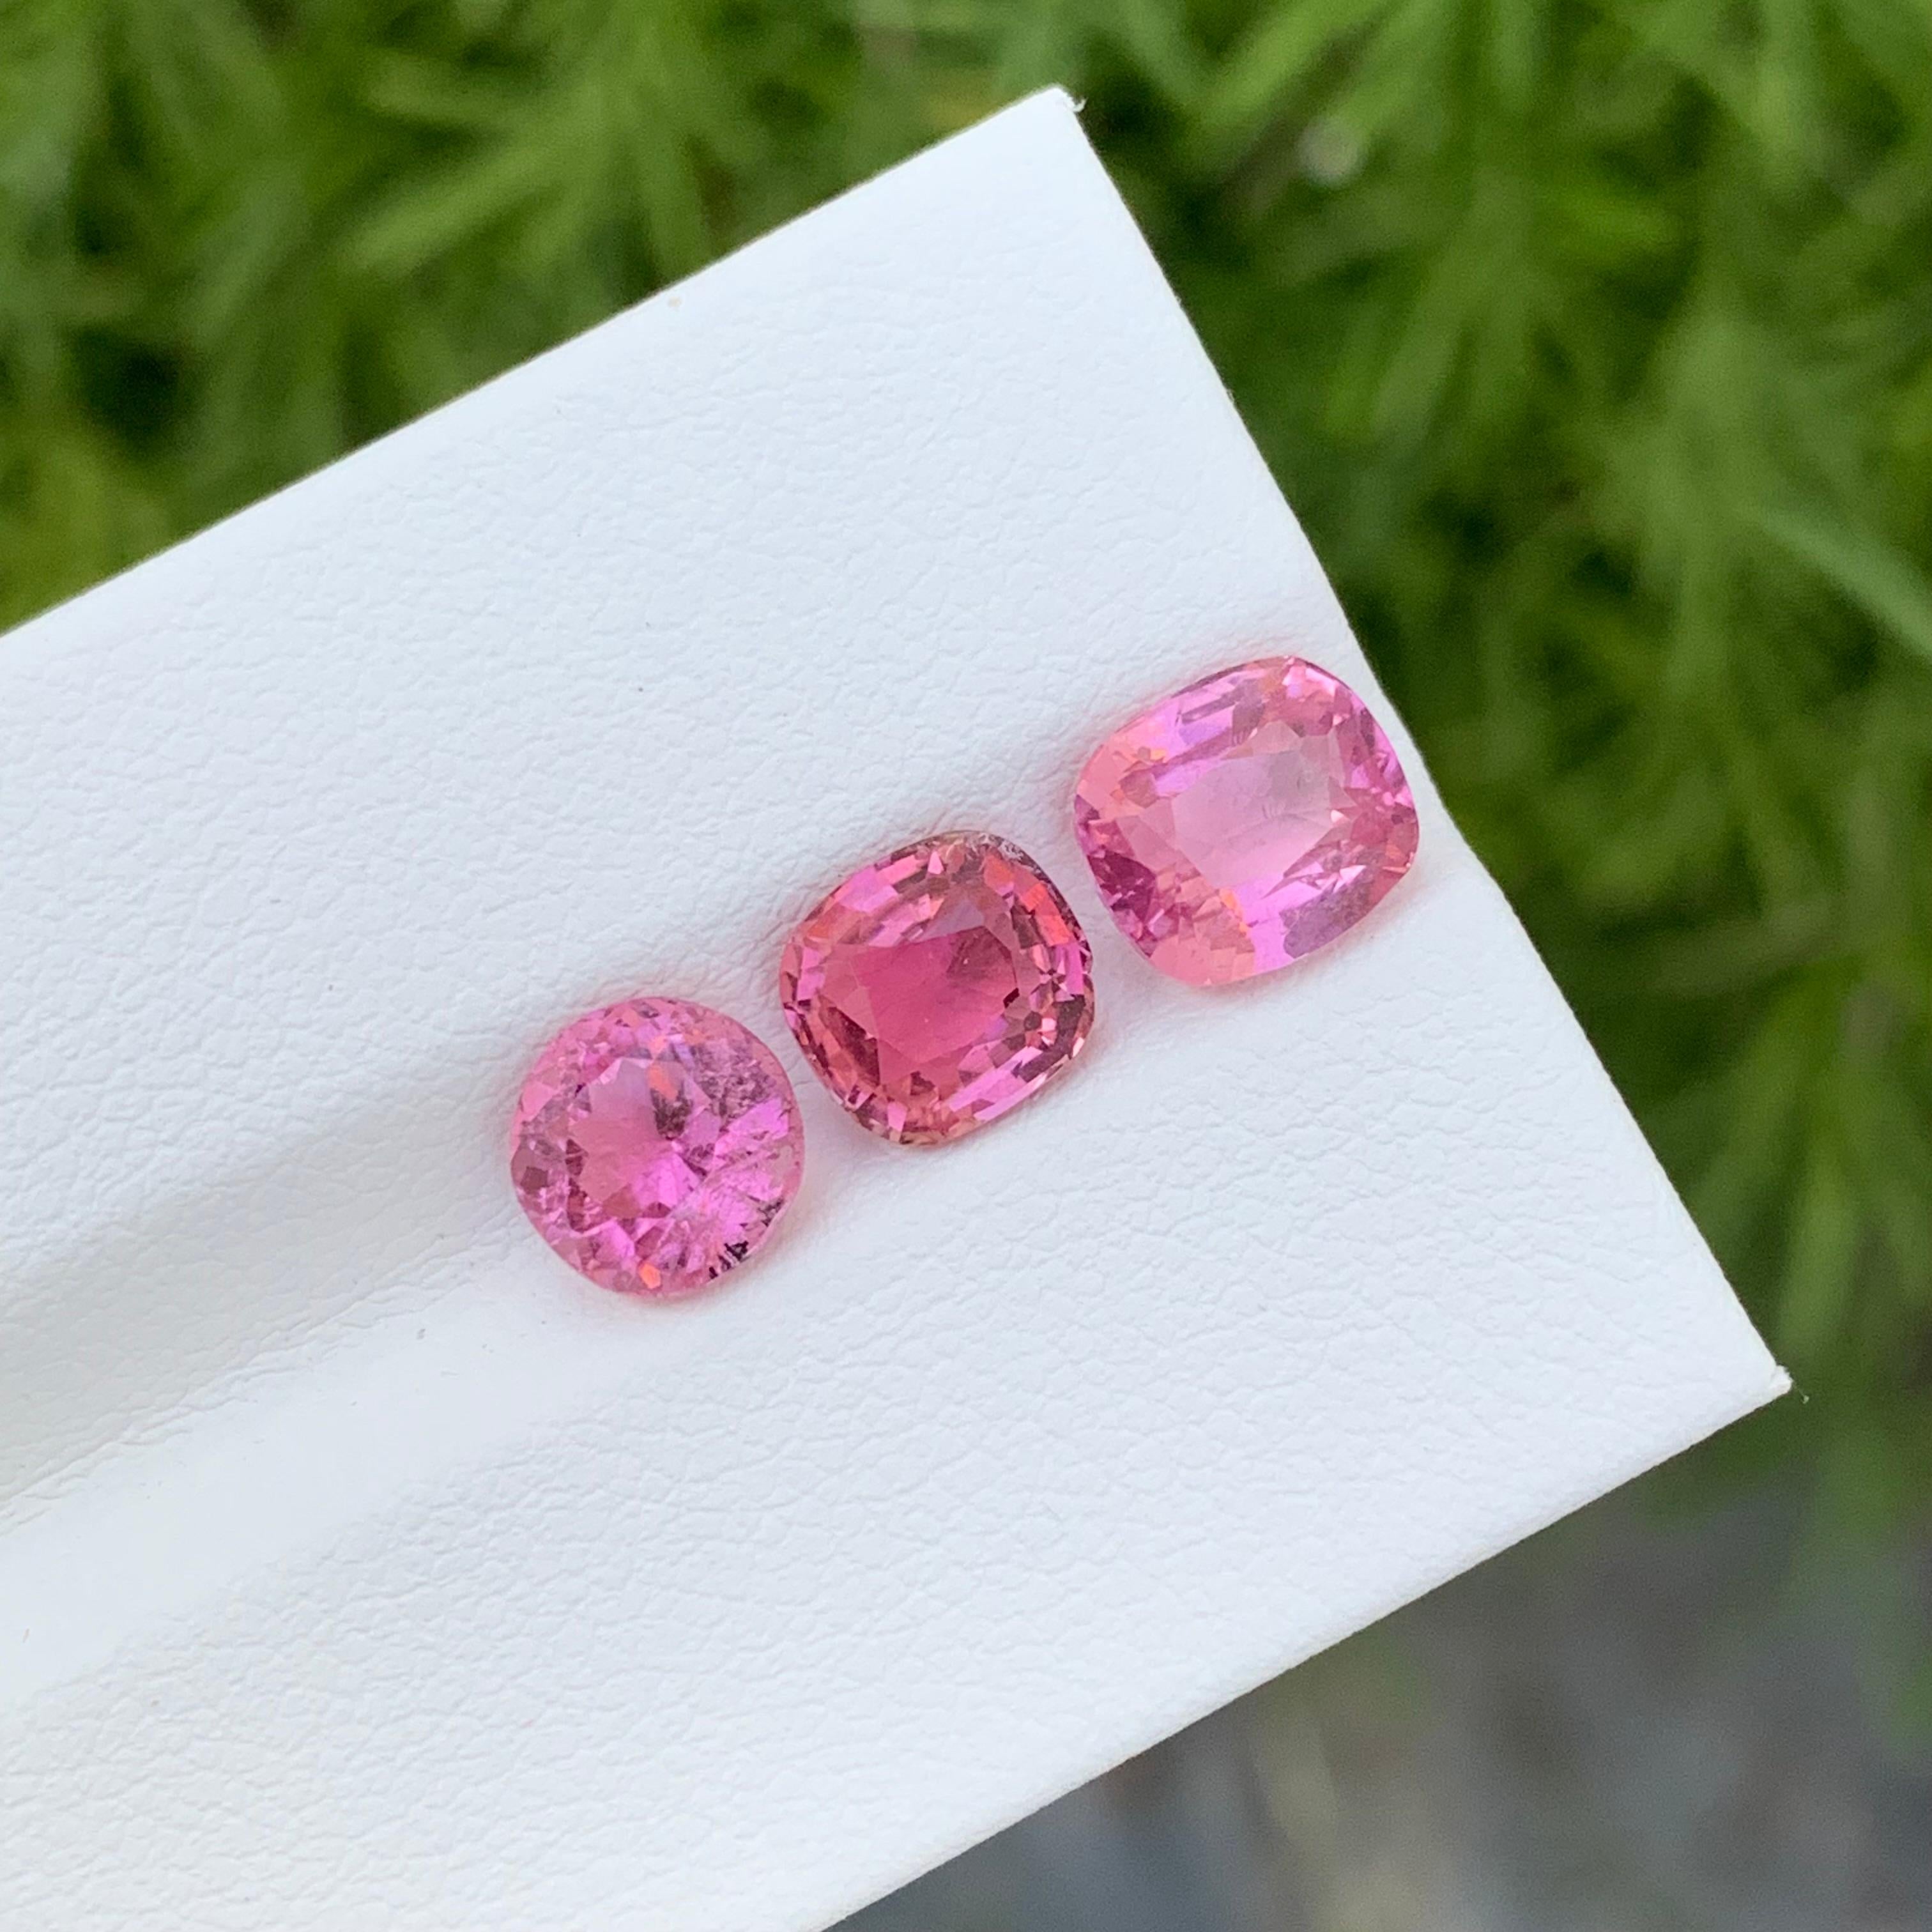 Loose Pink Tourmaline
Weight: 4.50 Carats
Sizes: 1.90 , 1.25 , 1.40 Carats 
Colour: Pink
Origin: Afghanistan
Shape : Cushion
Certificate: On Demand
Treatment: Non

Pink tourmaline, known for its captivating hue ranging from delicate pastel shades to